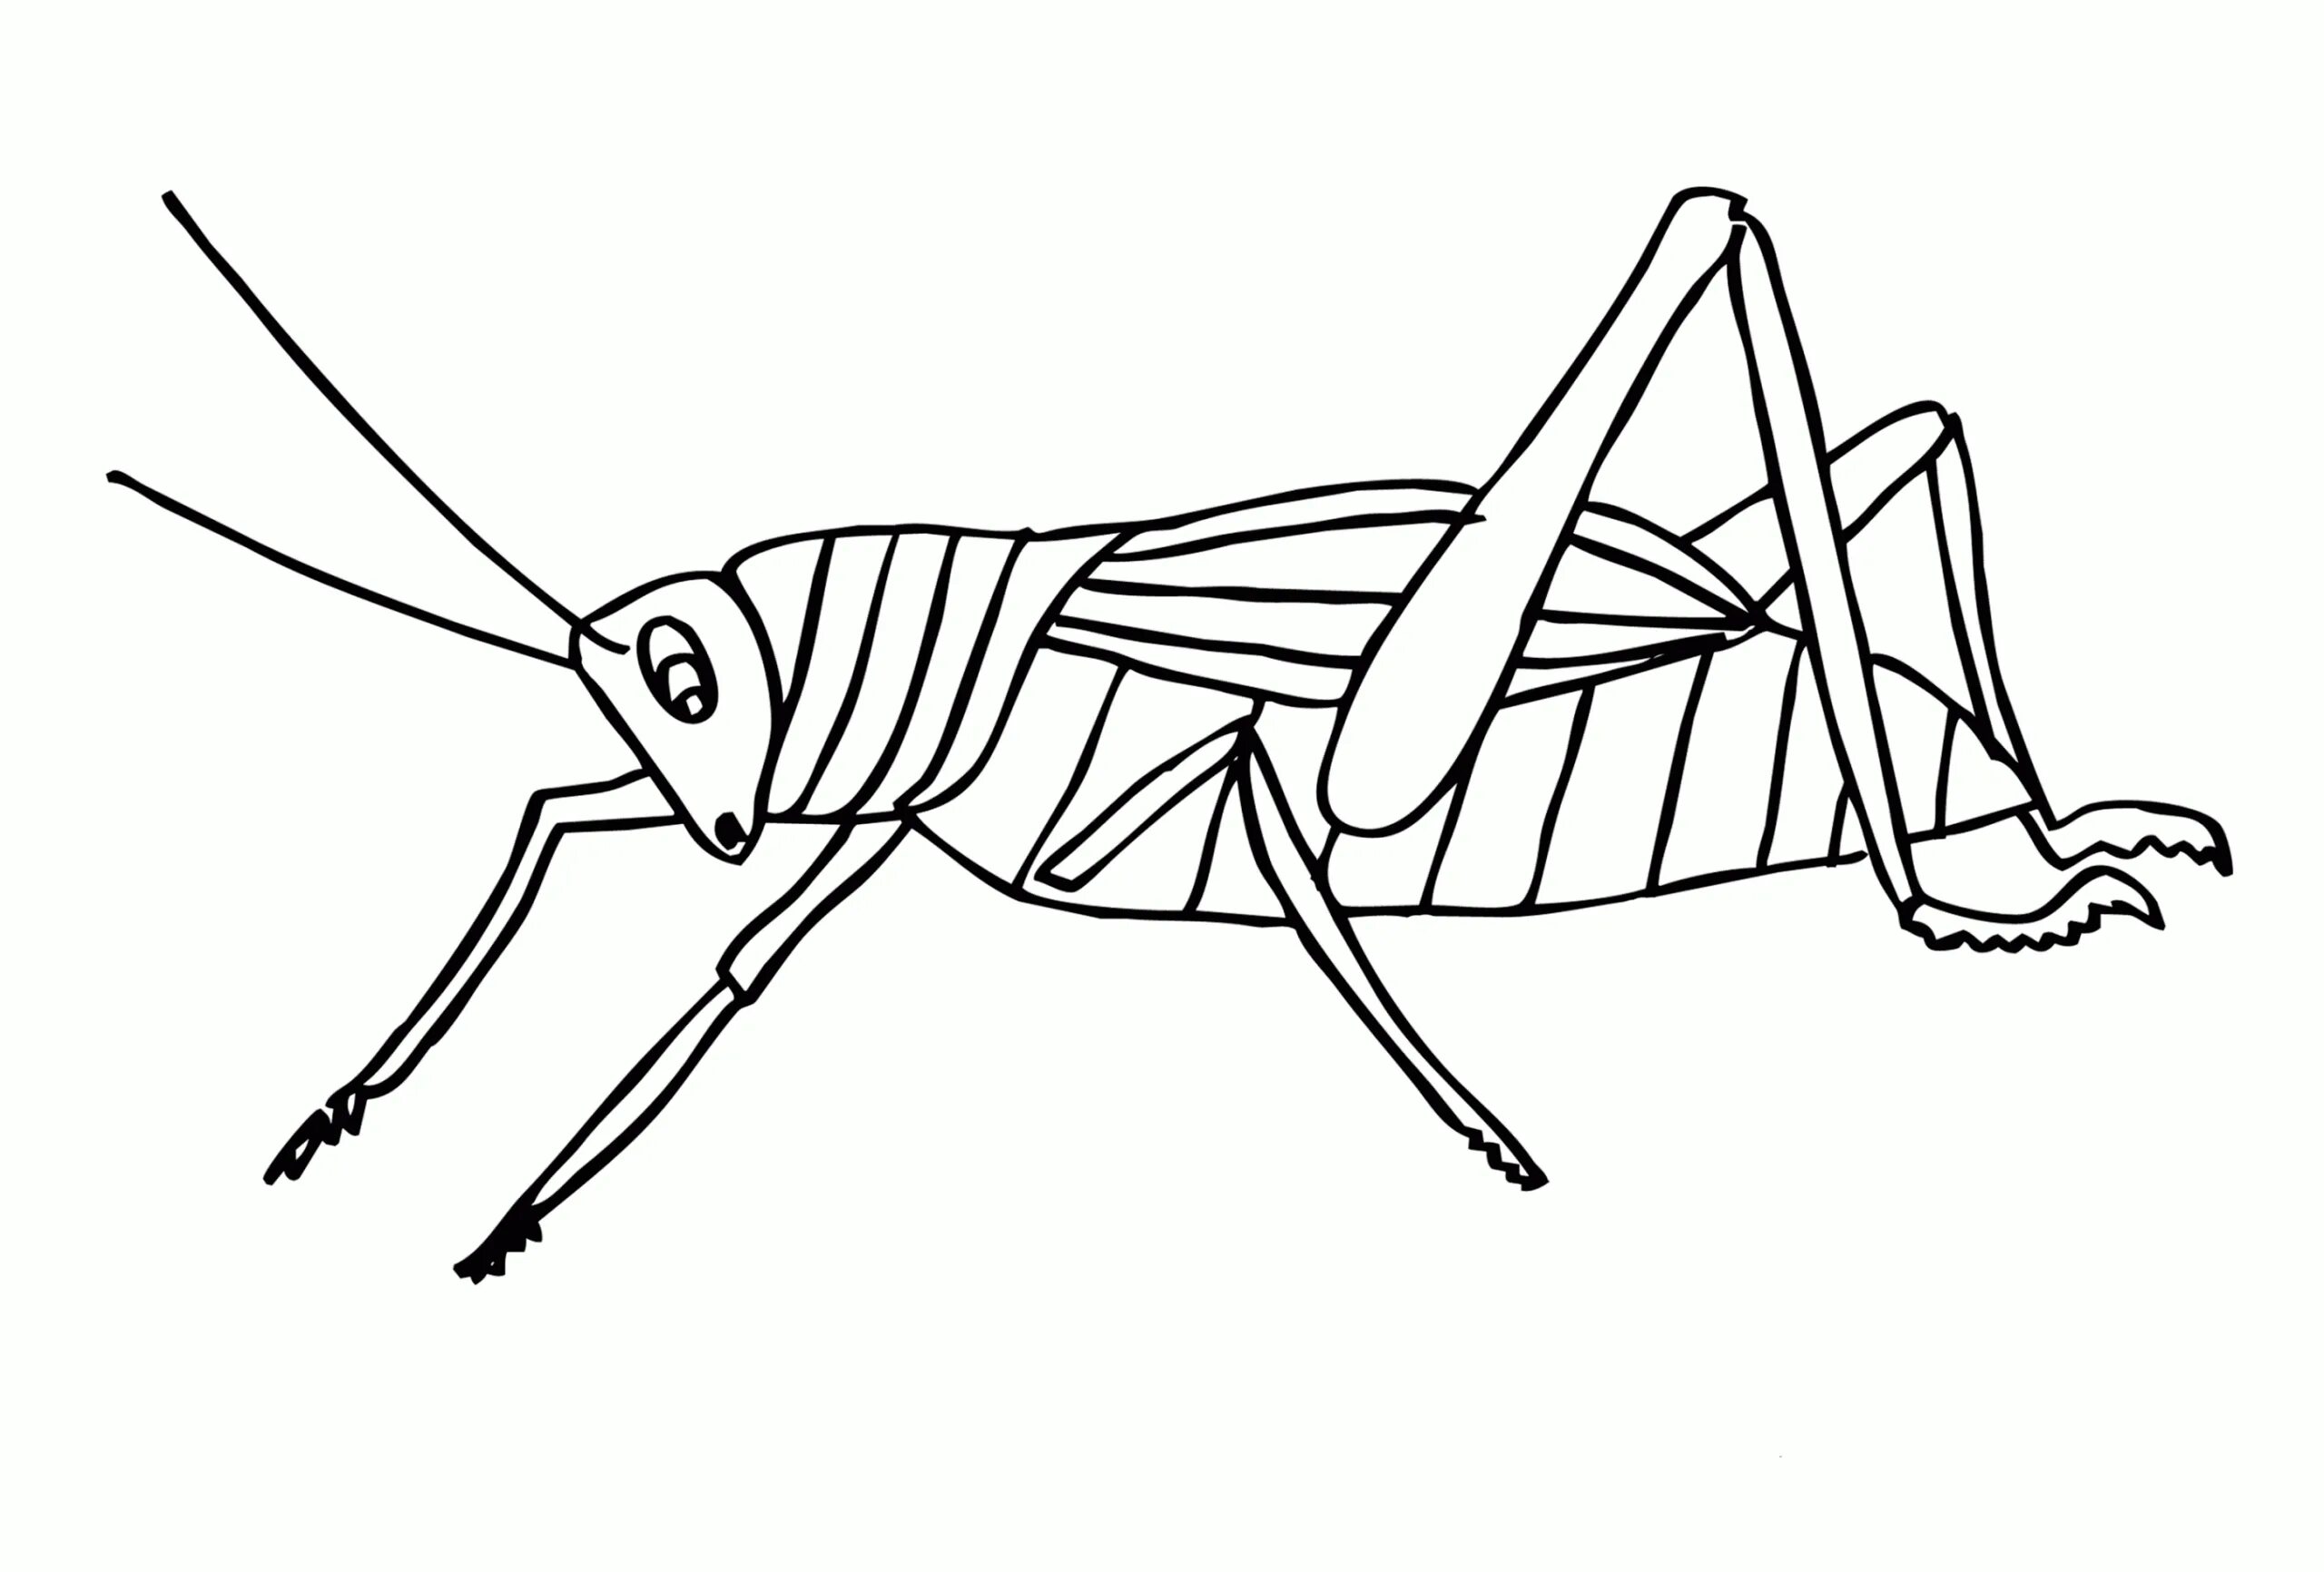 Colorful playful cricket coloring page